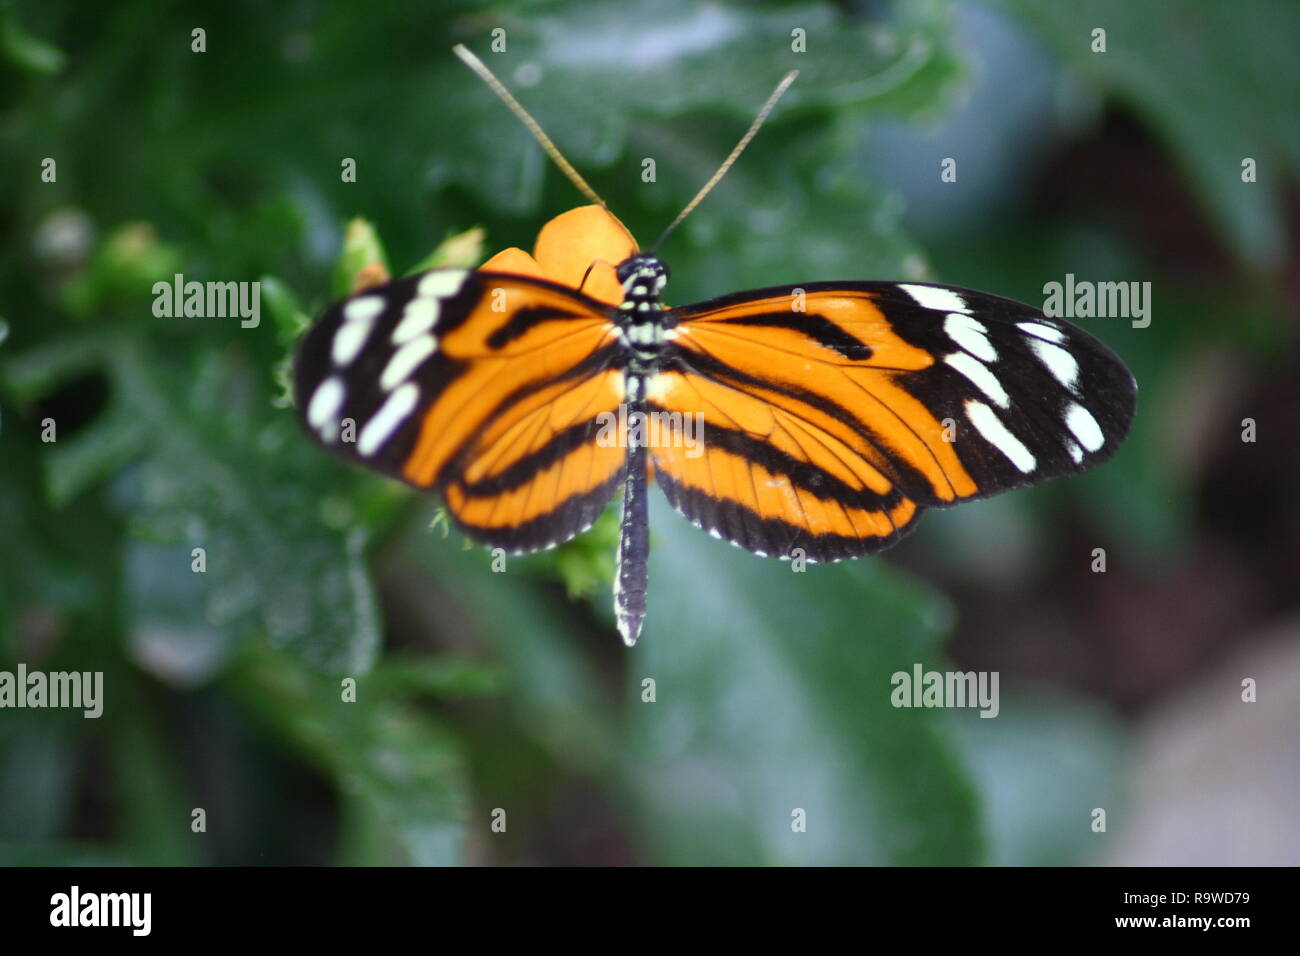 A very nice colorful butterfly Stock Photo